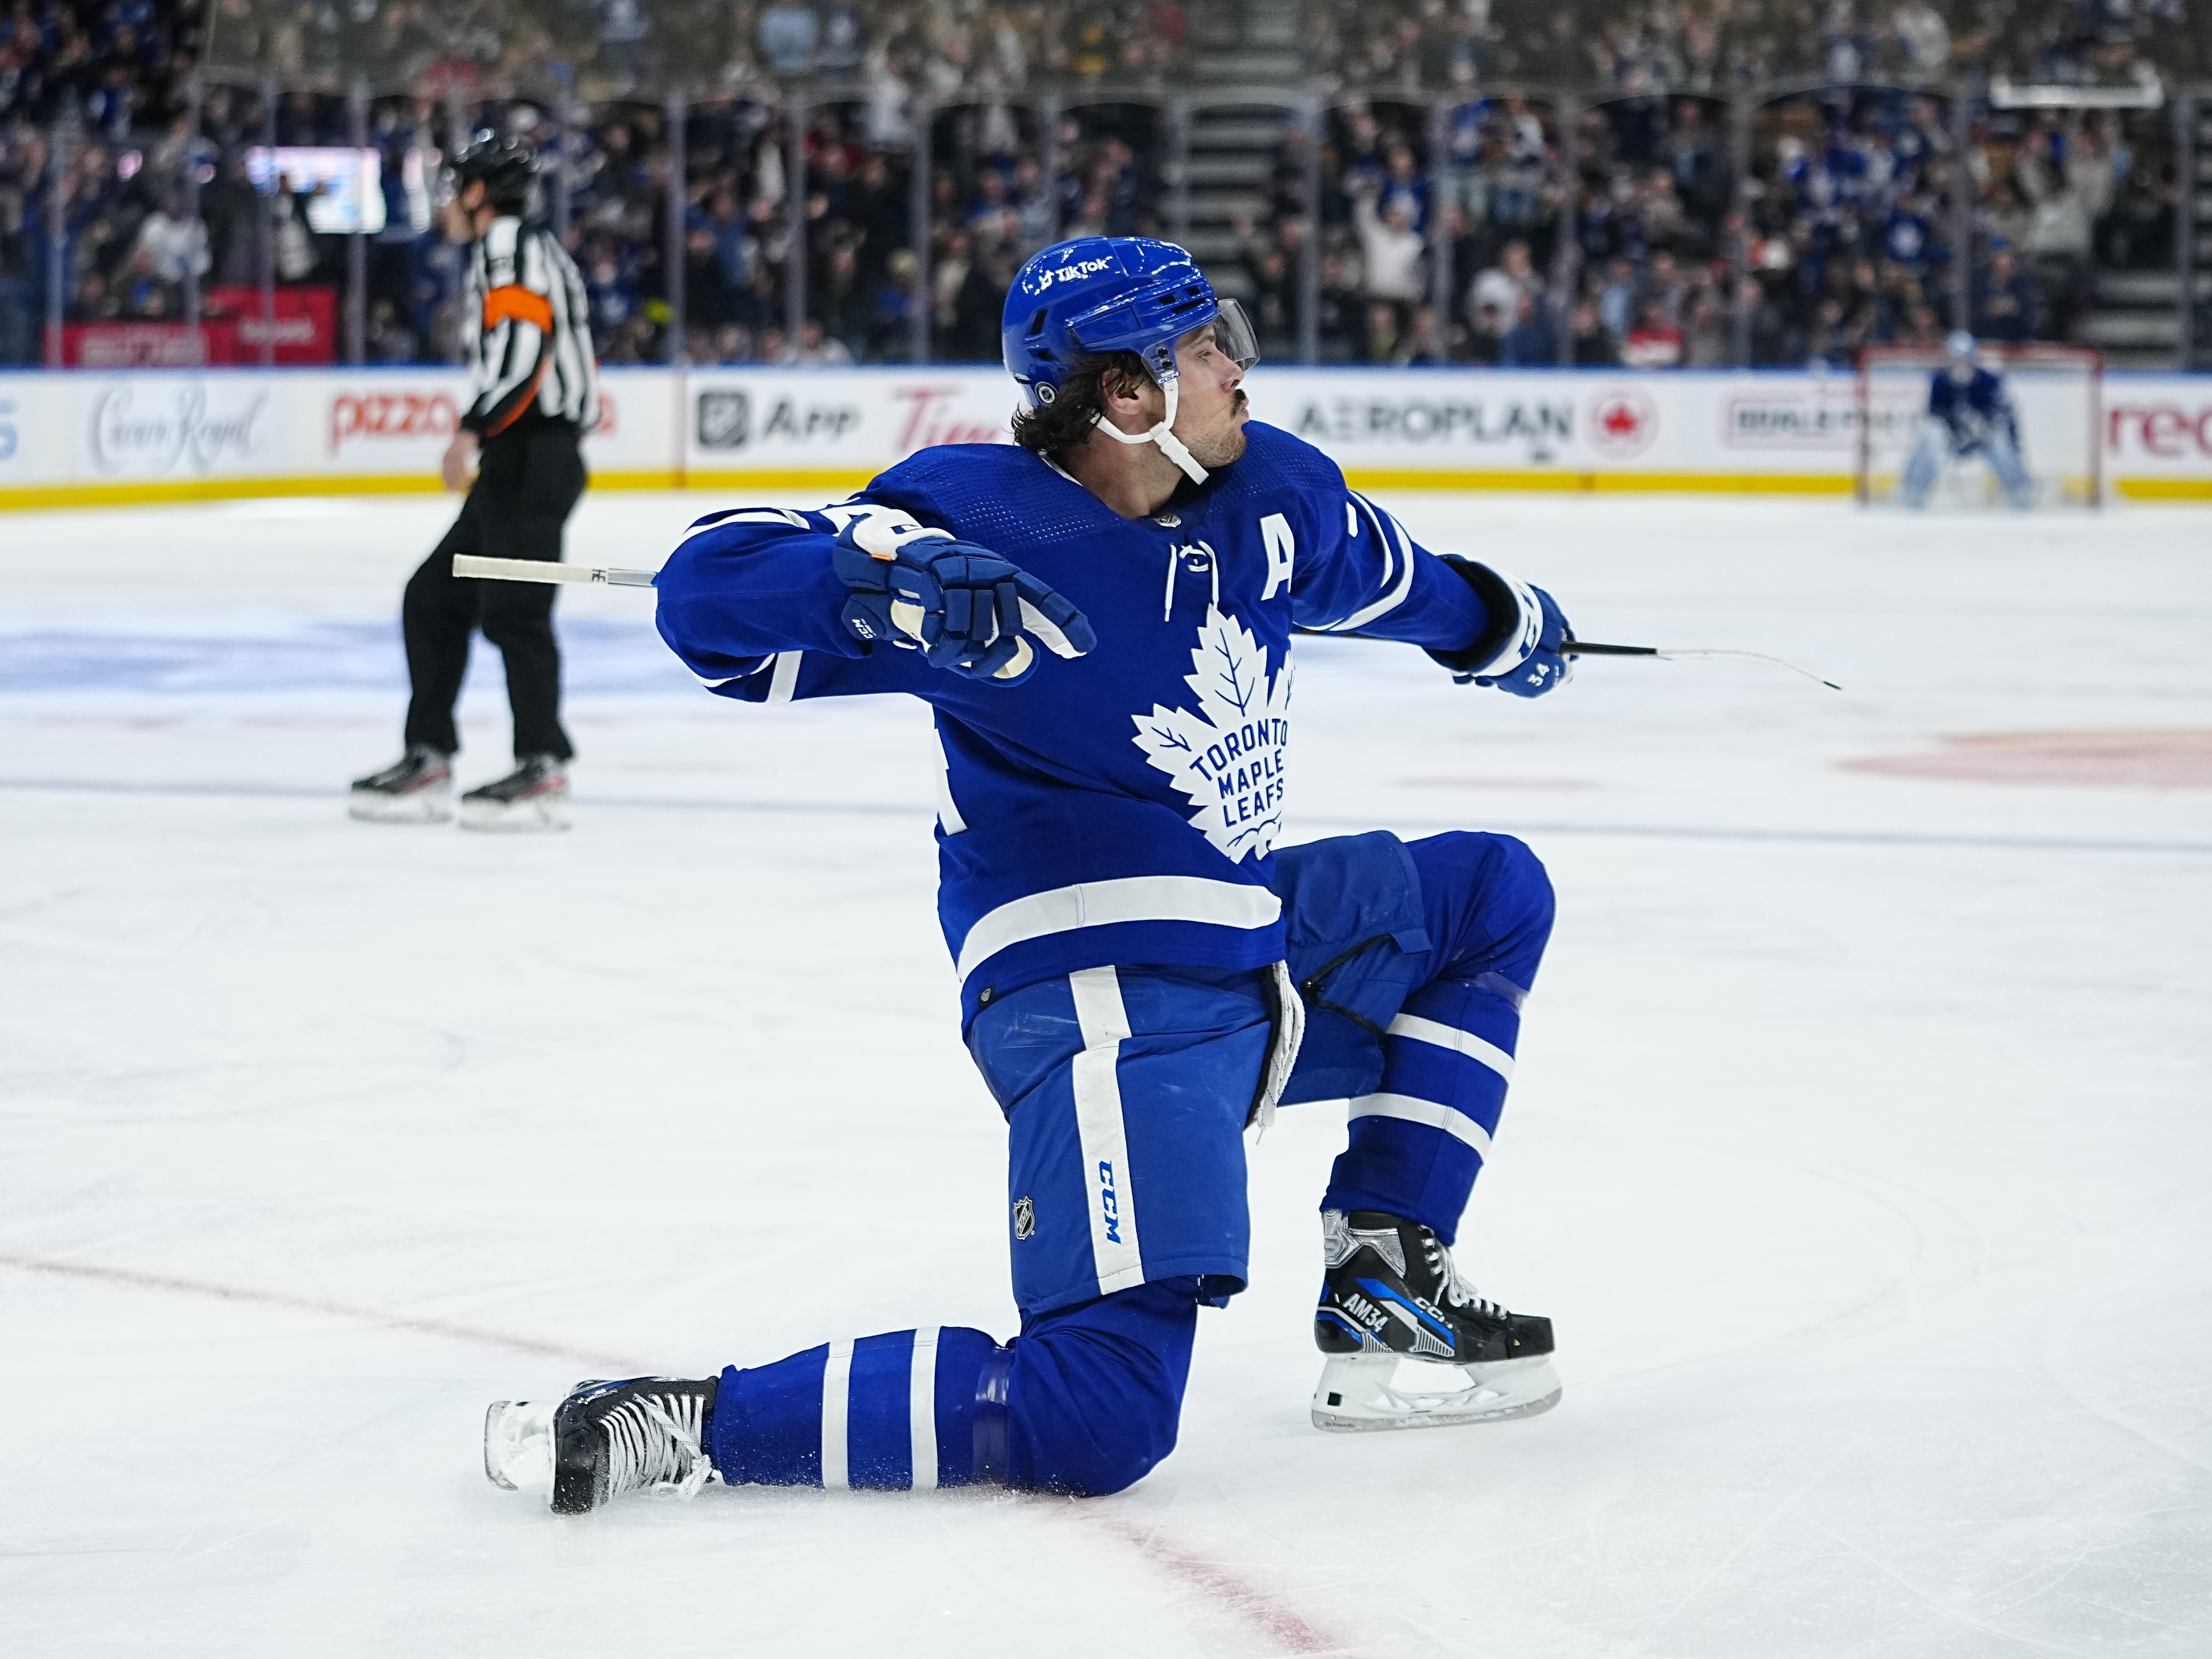 Toronto Maple Leafs: Round 1 Eastern Conference NHL Playoff Predictions